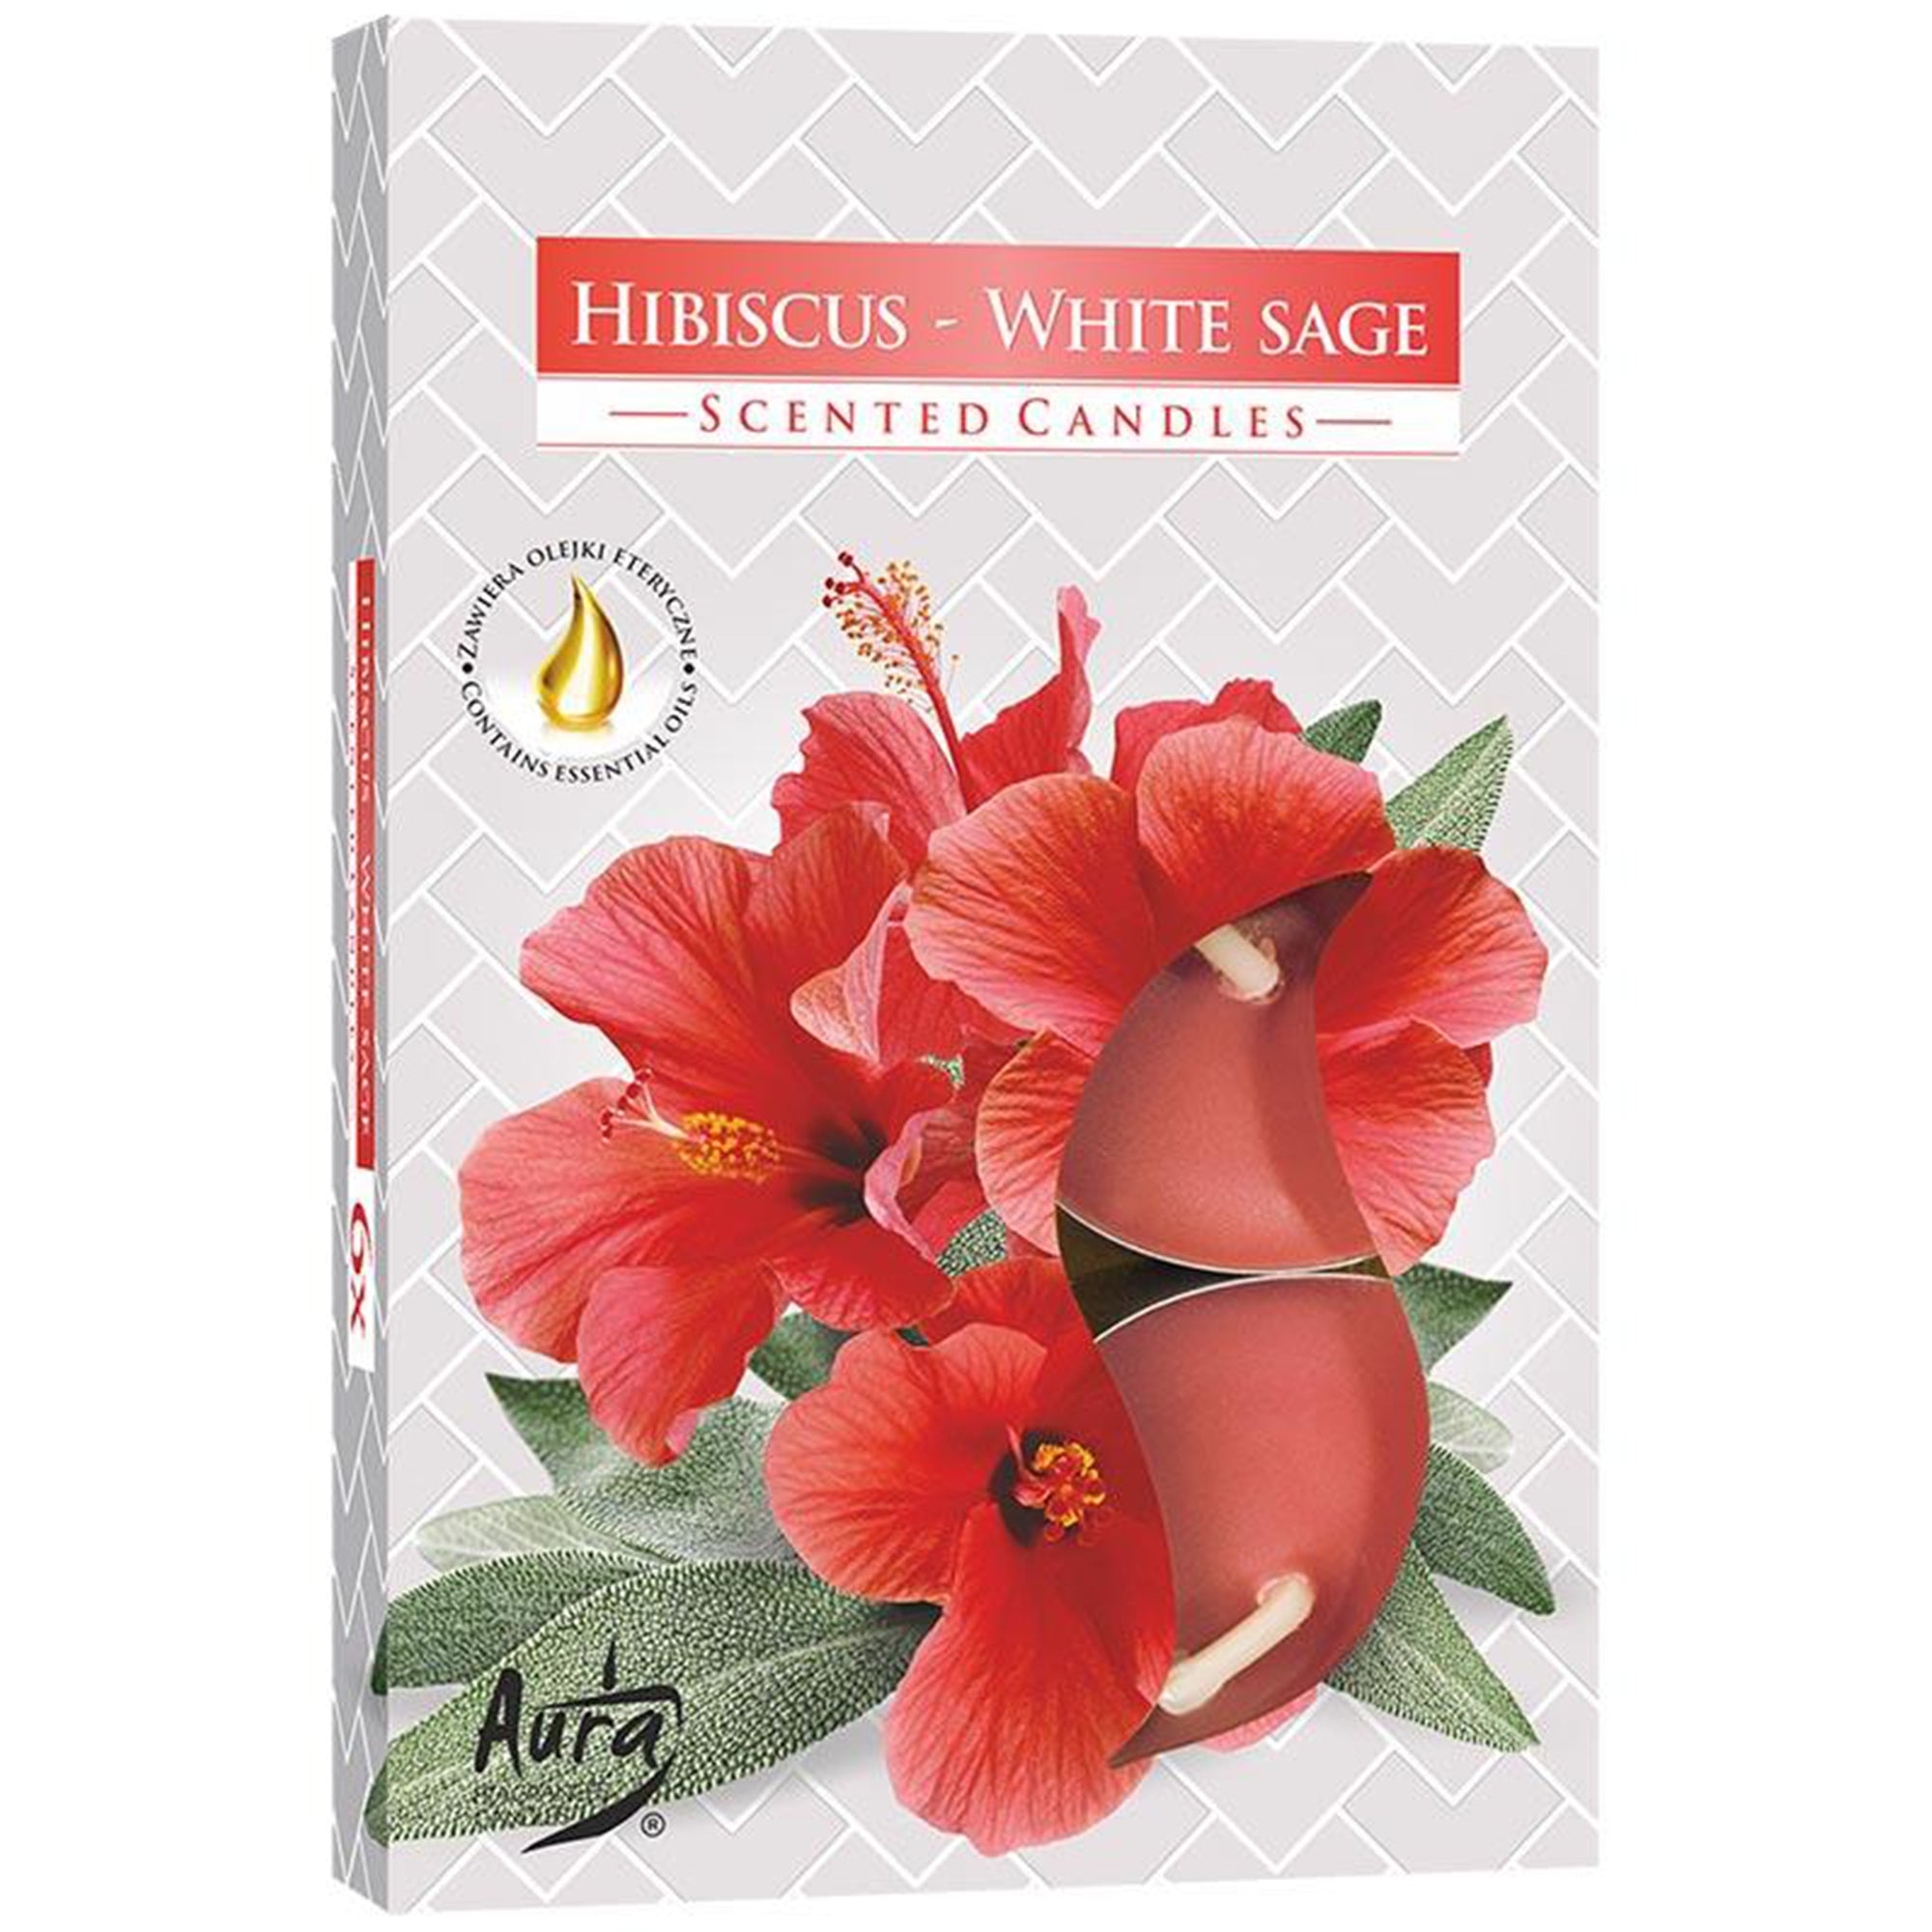 View Set of 6 Scented Tealights Hibiscus White Sage information